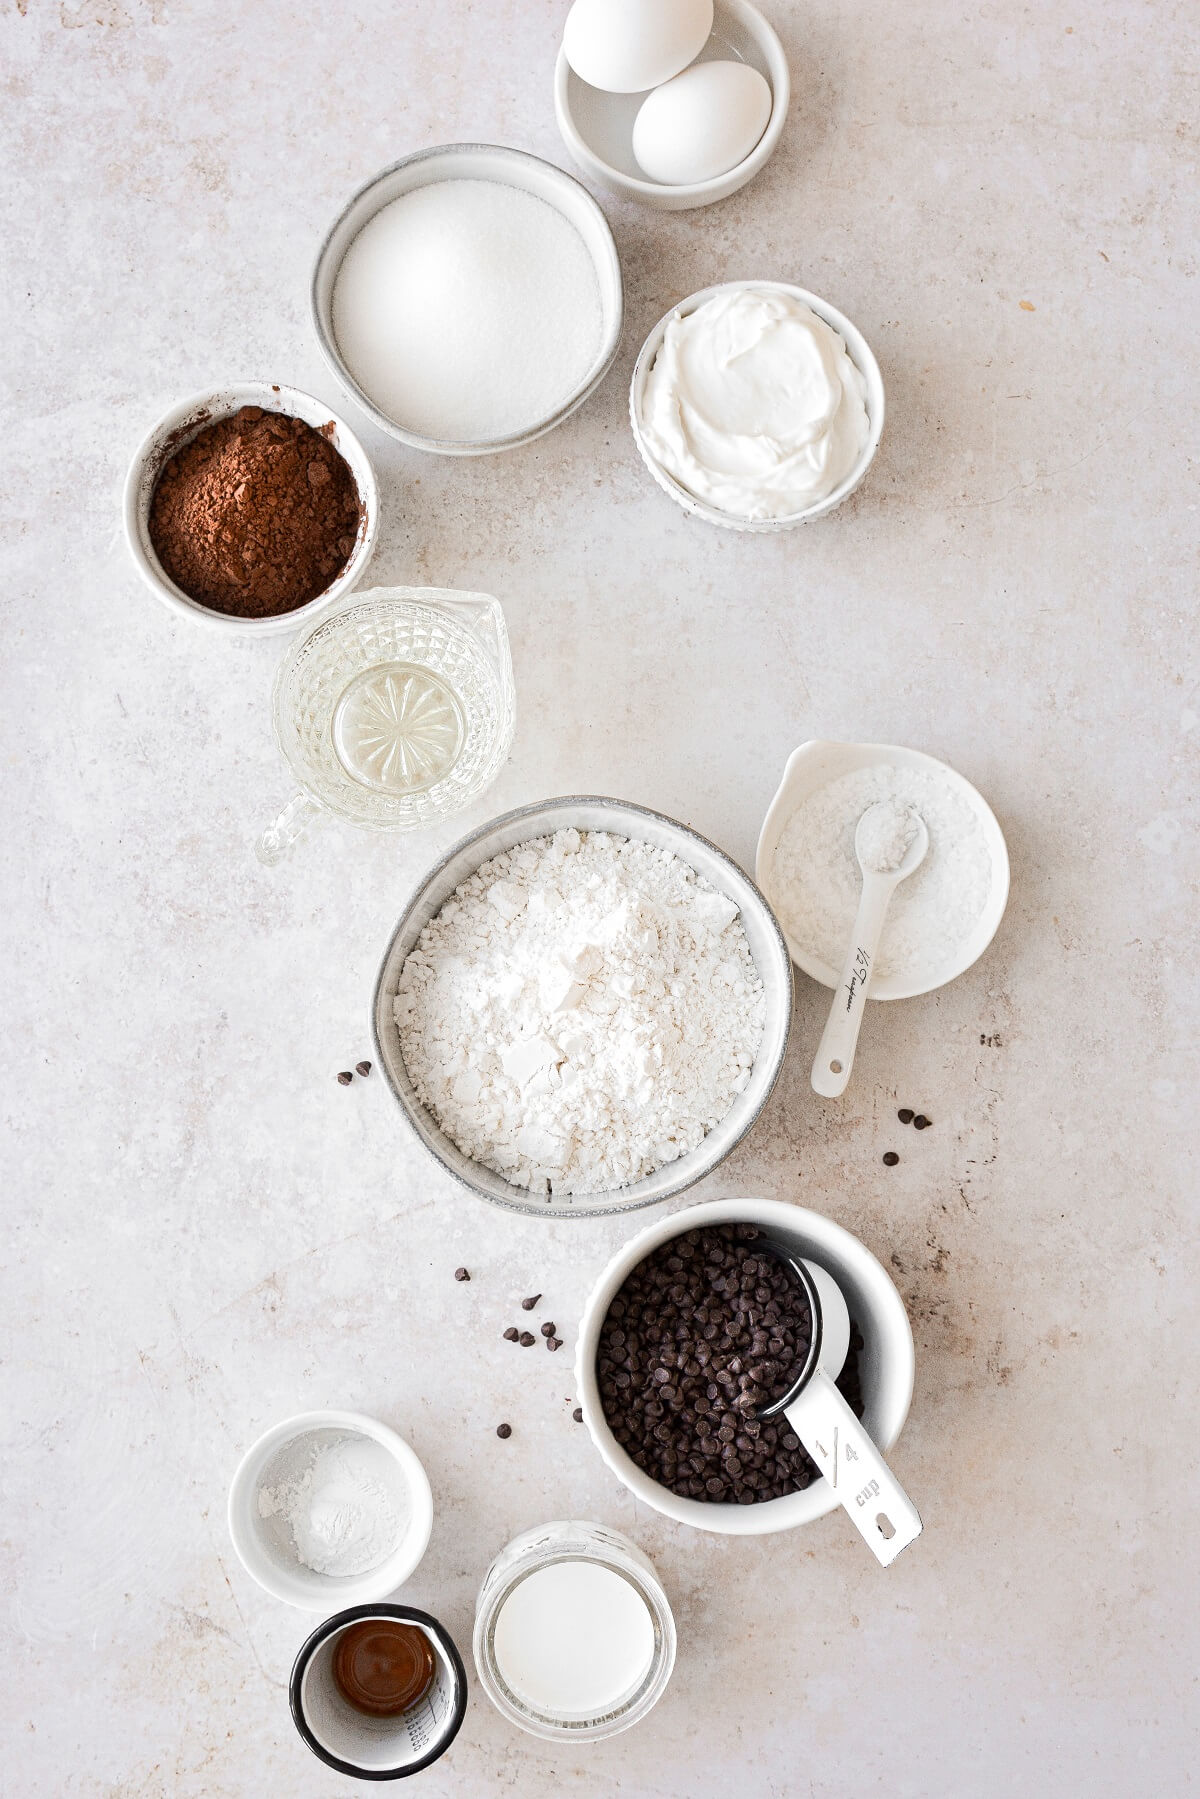 Ingredients for making chocolate muffins.